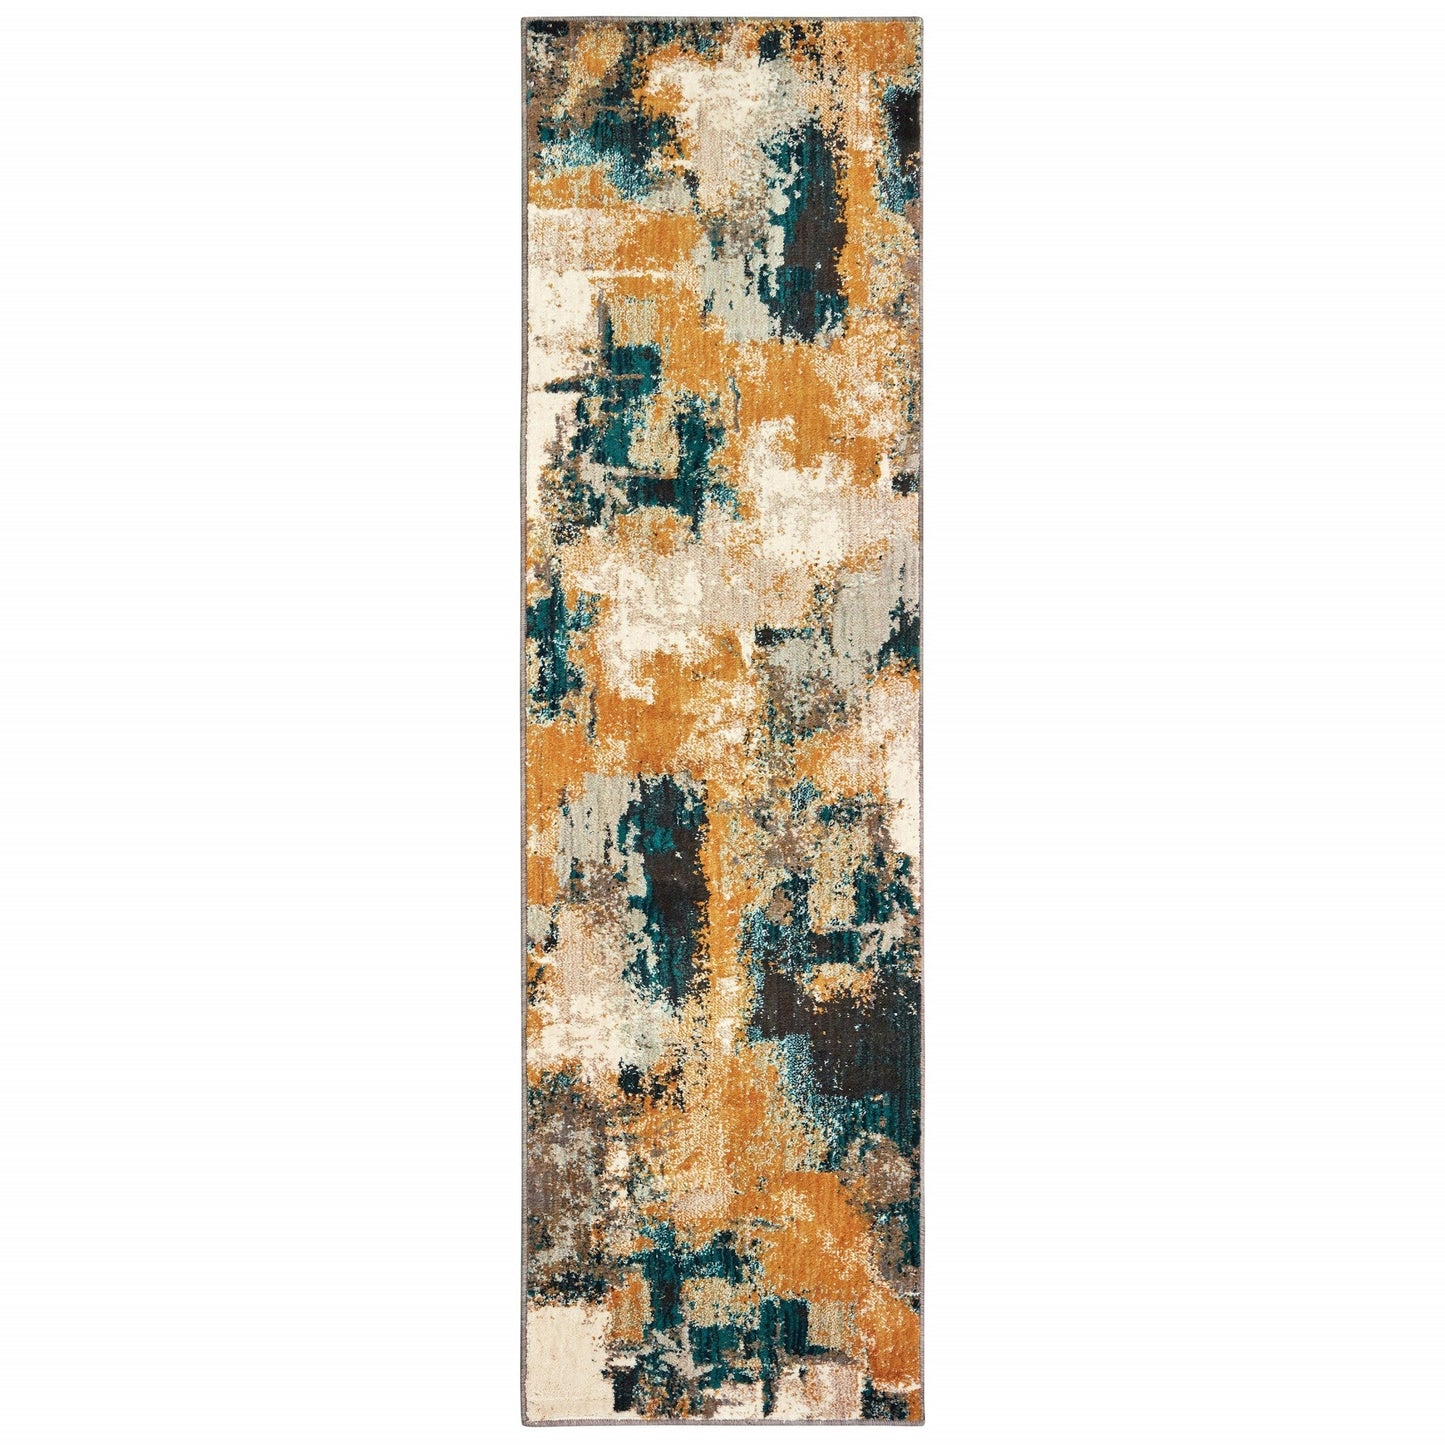 2’x8’ blue and gold abstract strokes runner rug